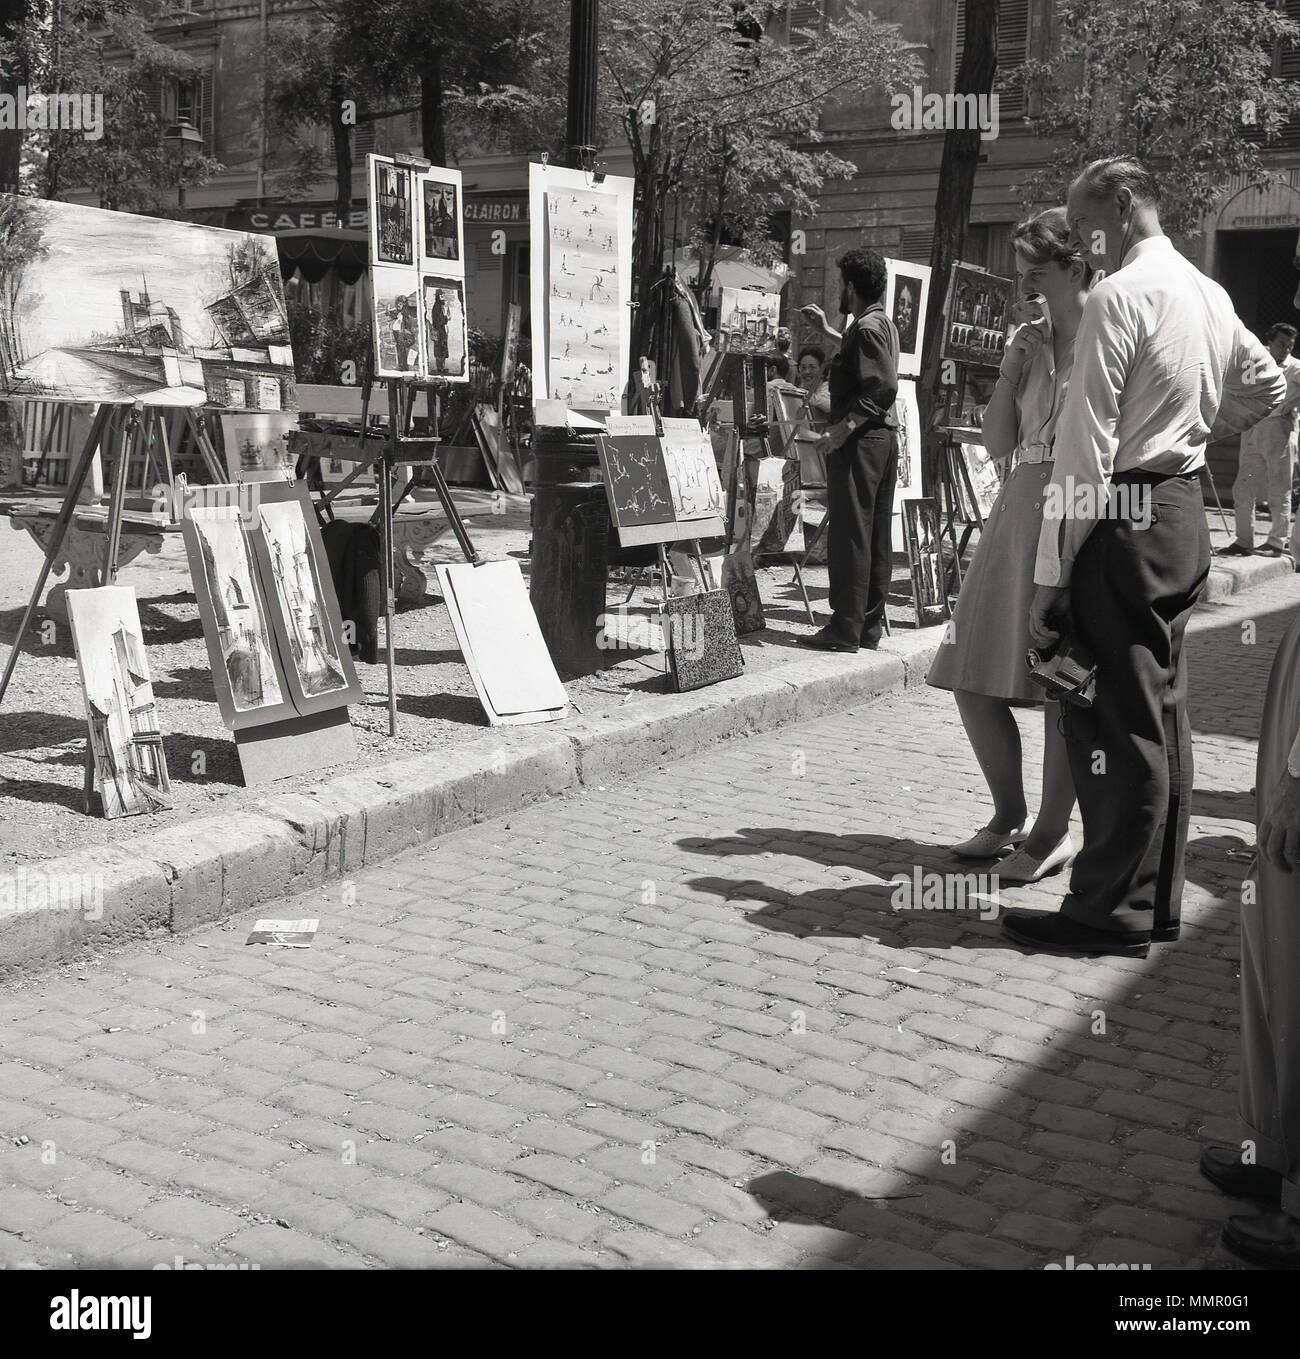 1950s, couple standing looking at the artwork displayed on the square of Place du Tertre at Montmartre, Paris, France. The area, in the northern part of the city, is famous for its artistic history and street artists use the main square to create and display their work. Stock Photo